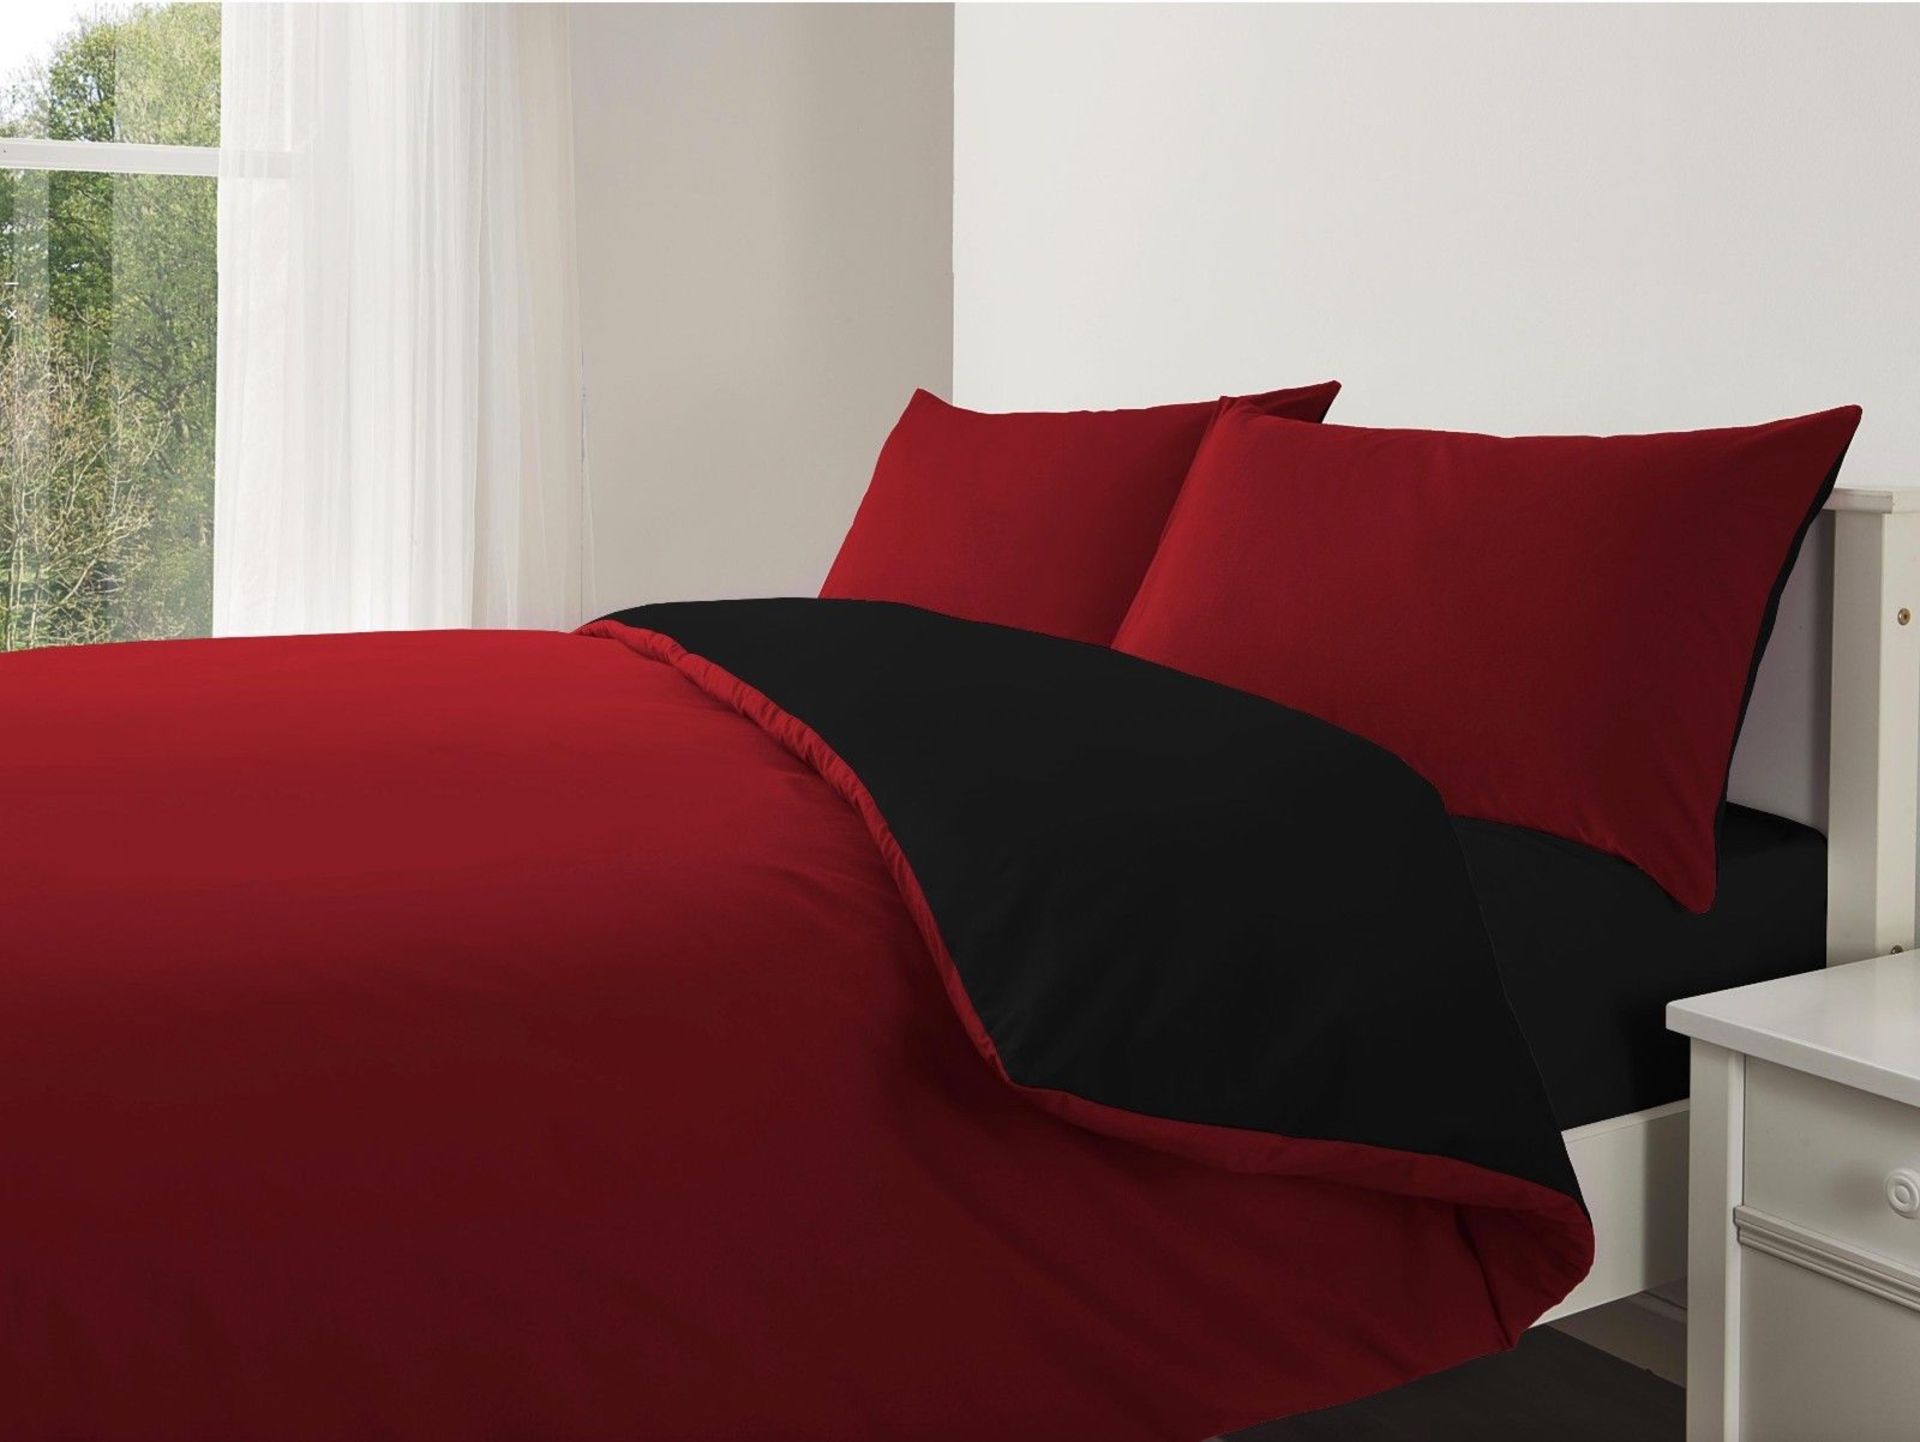 V *TRADE QTY* Brand New Red & Black Complete Reversible Double Bed Set Incldes - 1 Duvet Cover - 1